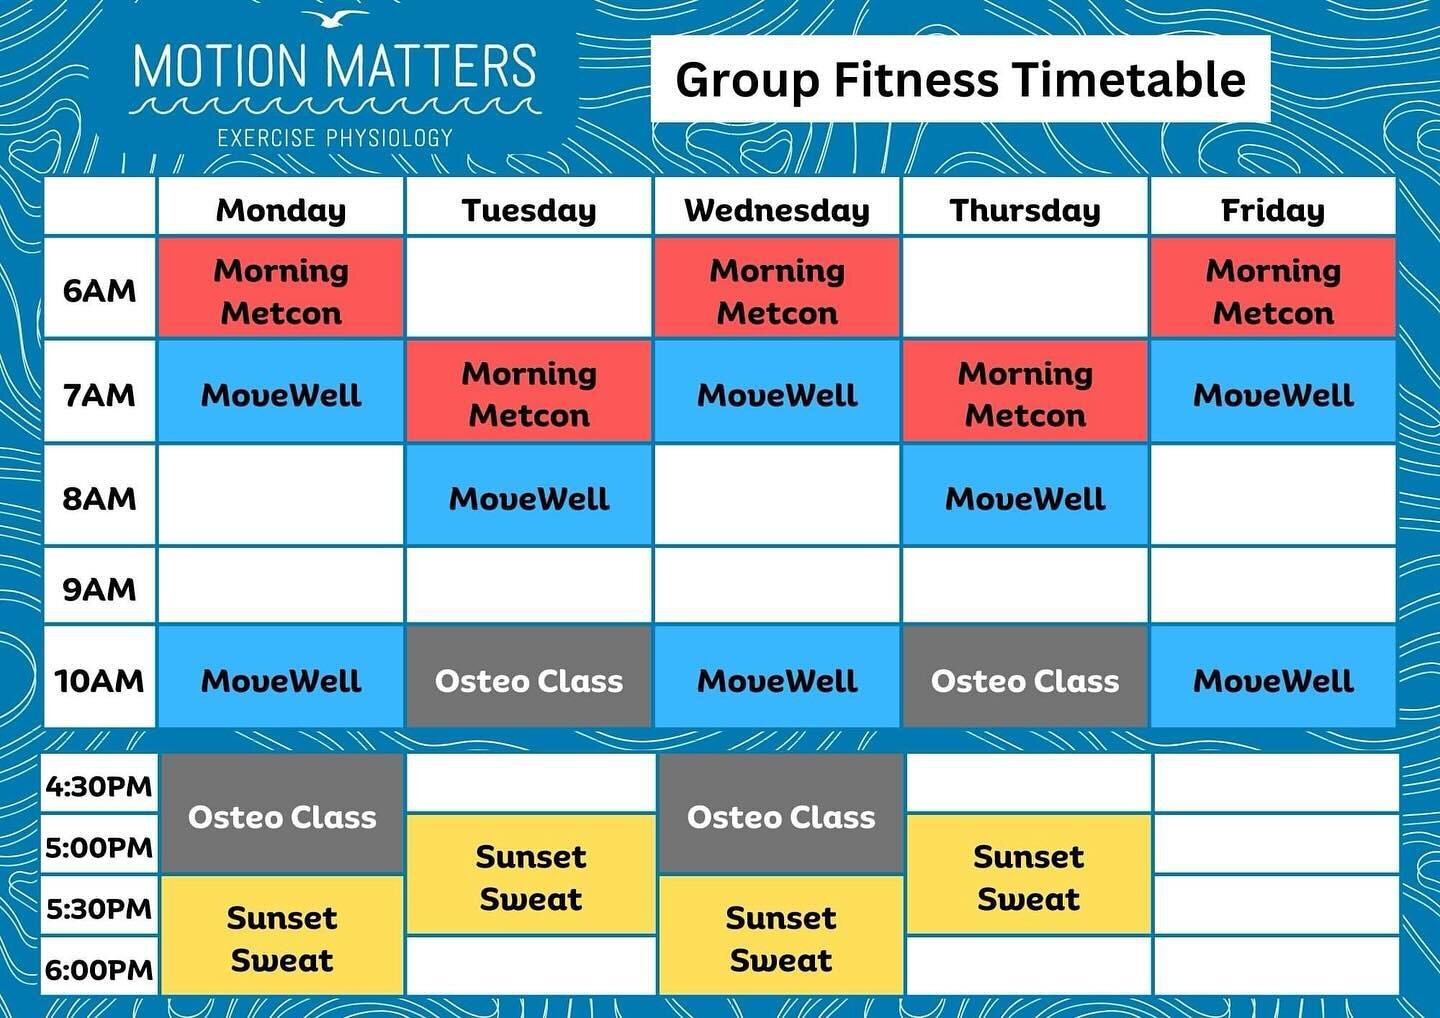 *Group fitness timetable update*

Hi all we are going to be updating our group fitness timetable as of next week (08/04/2024). The main changes are for the afternoon classes with the Monday and Wednesday afternoon classes starting 30mins earlier and 